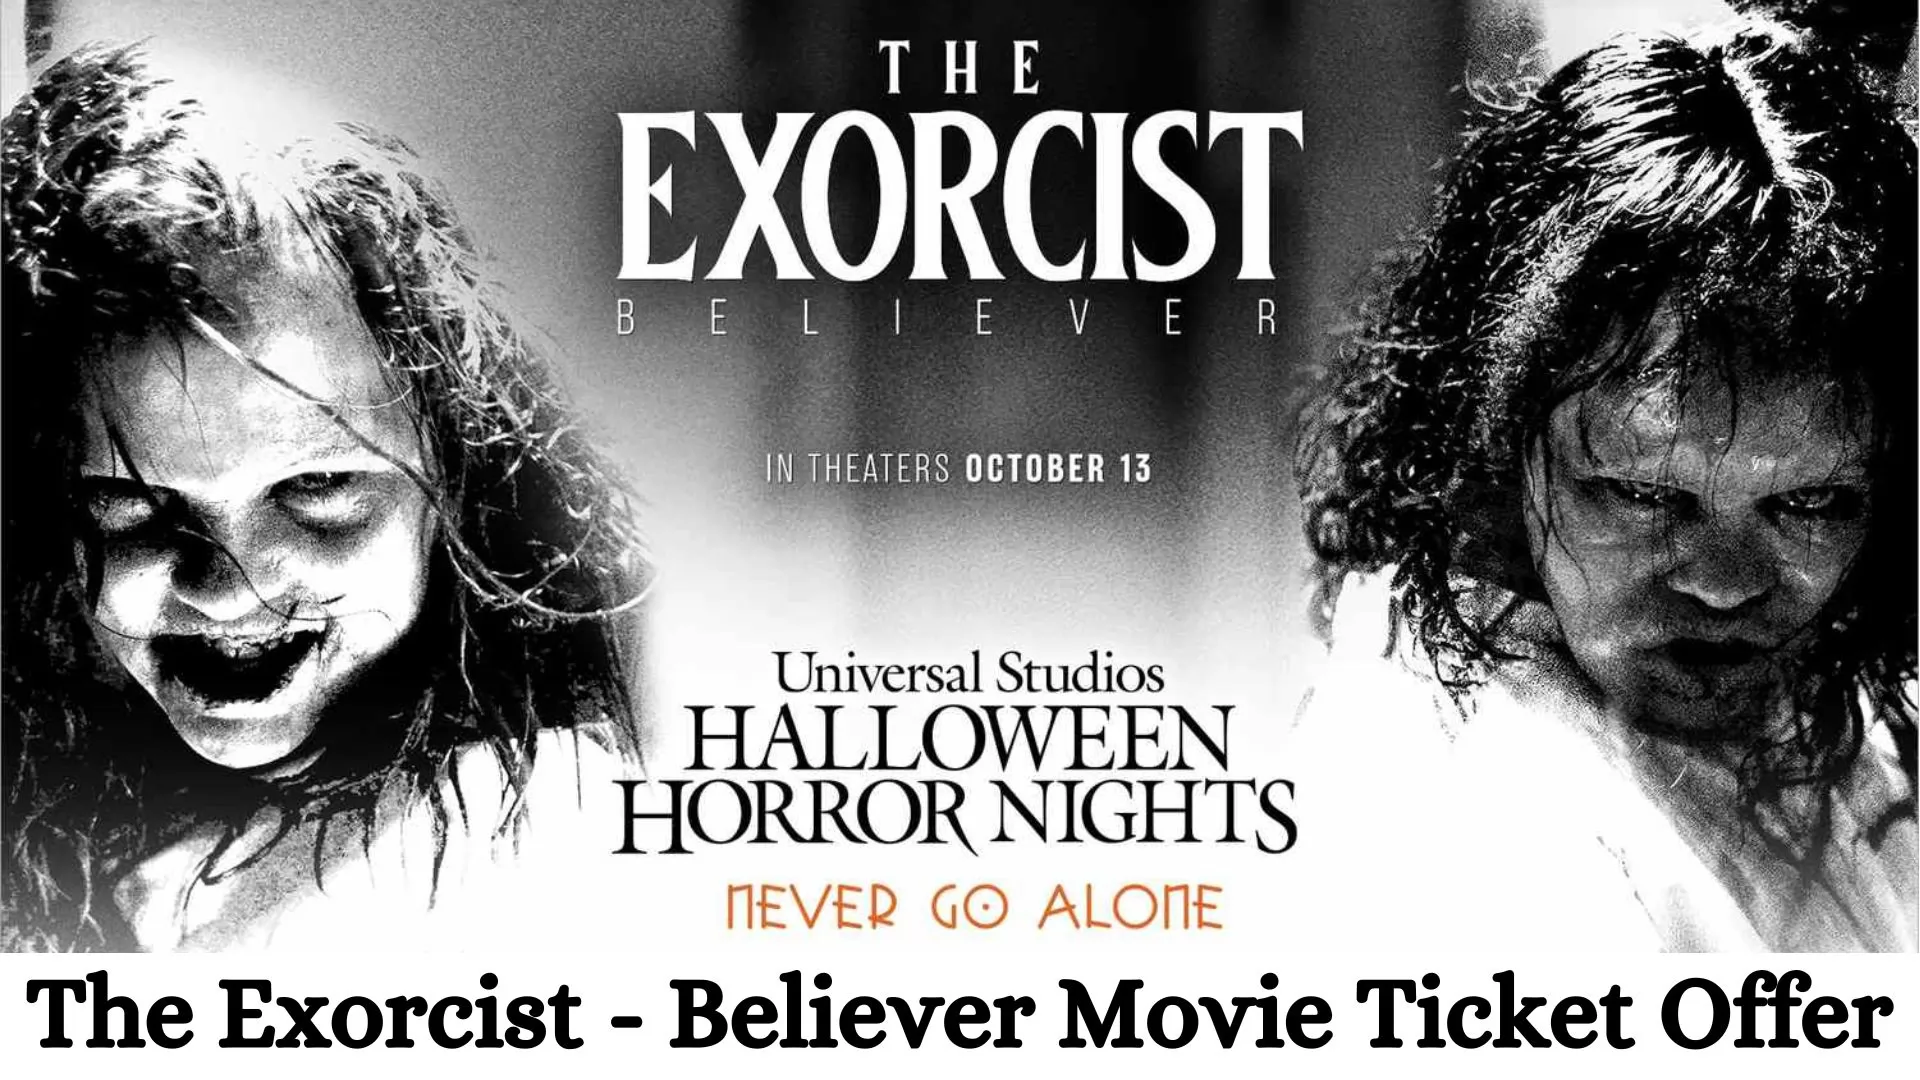 The Exorcist - Believer Movie Ticket Offer